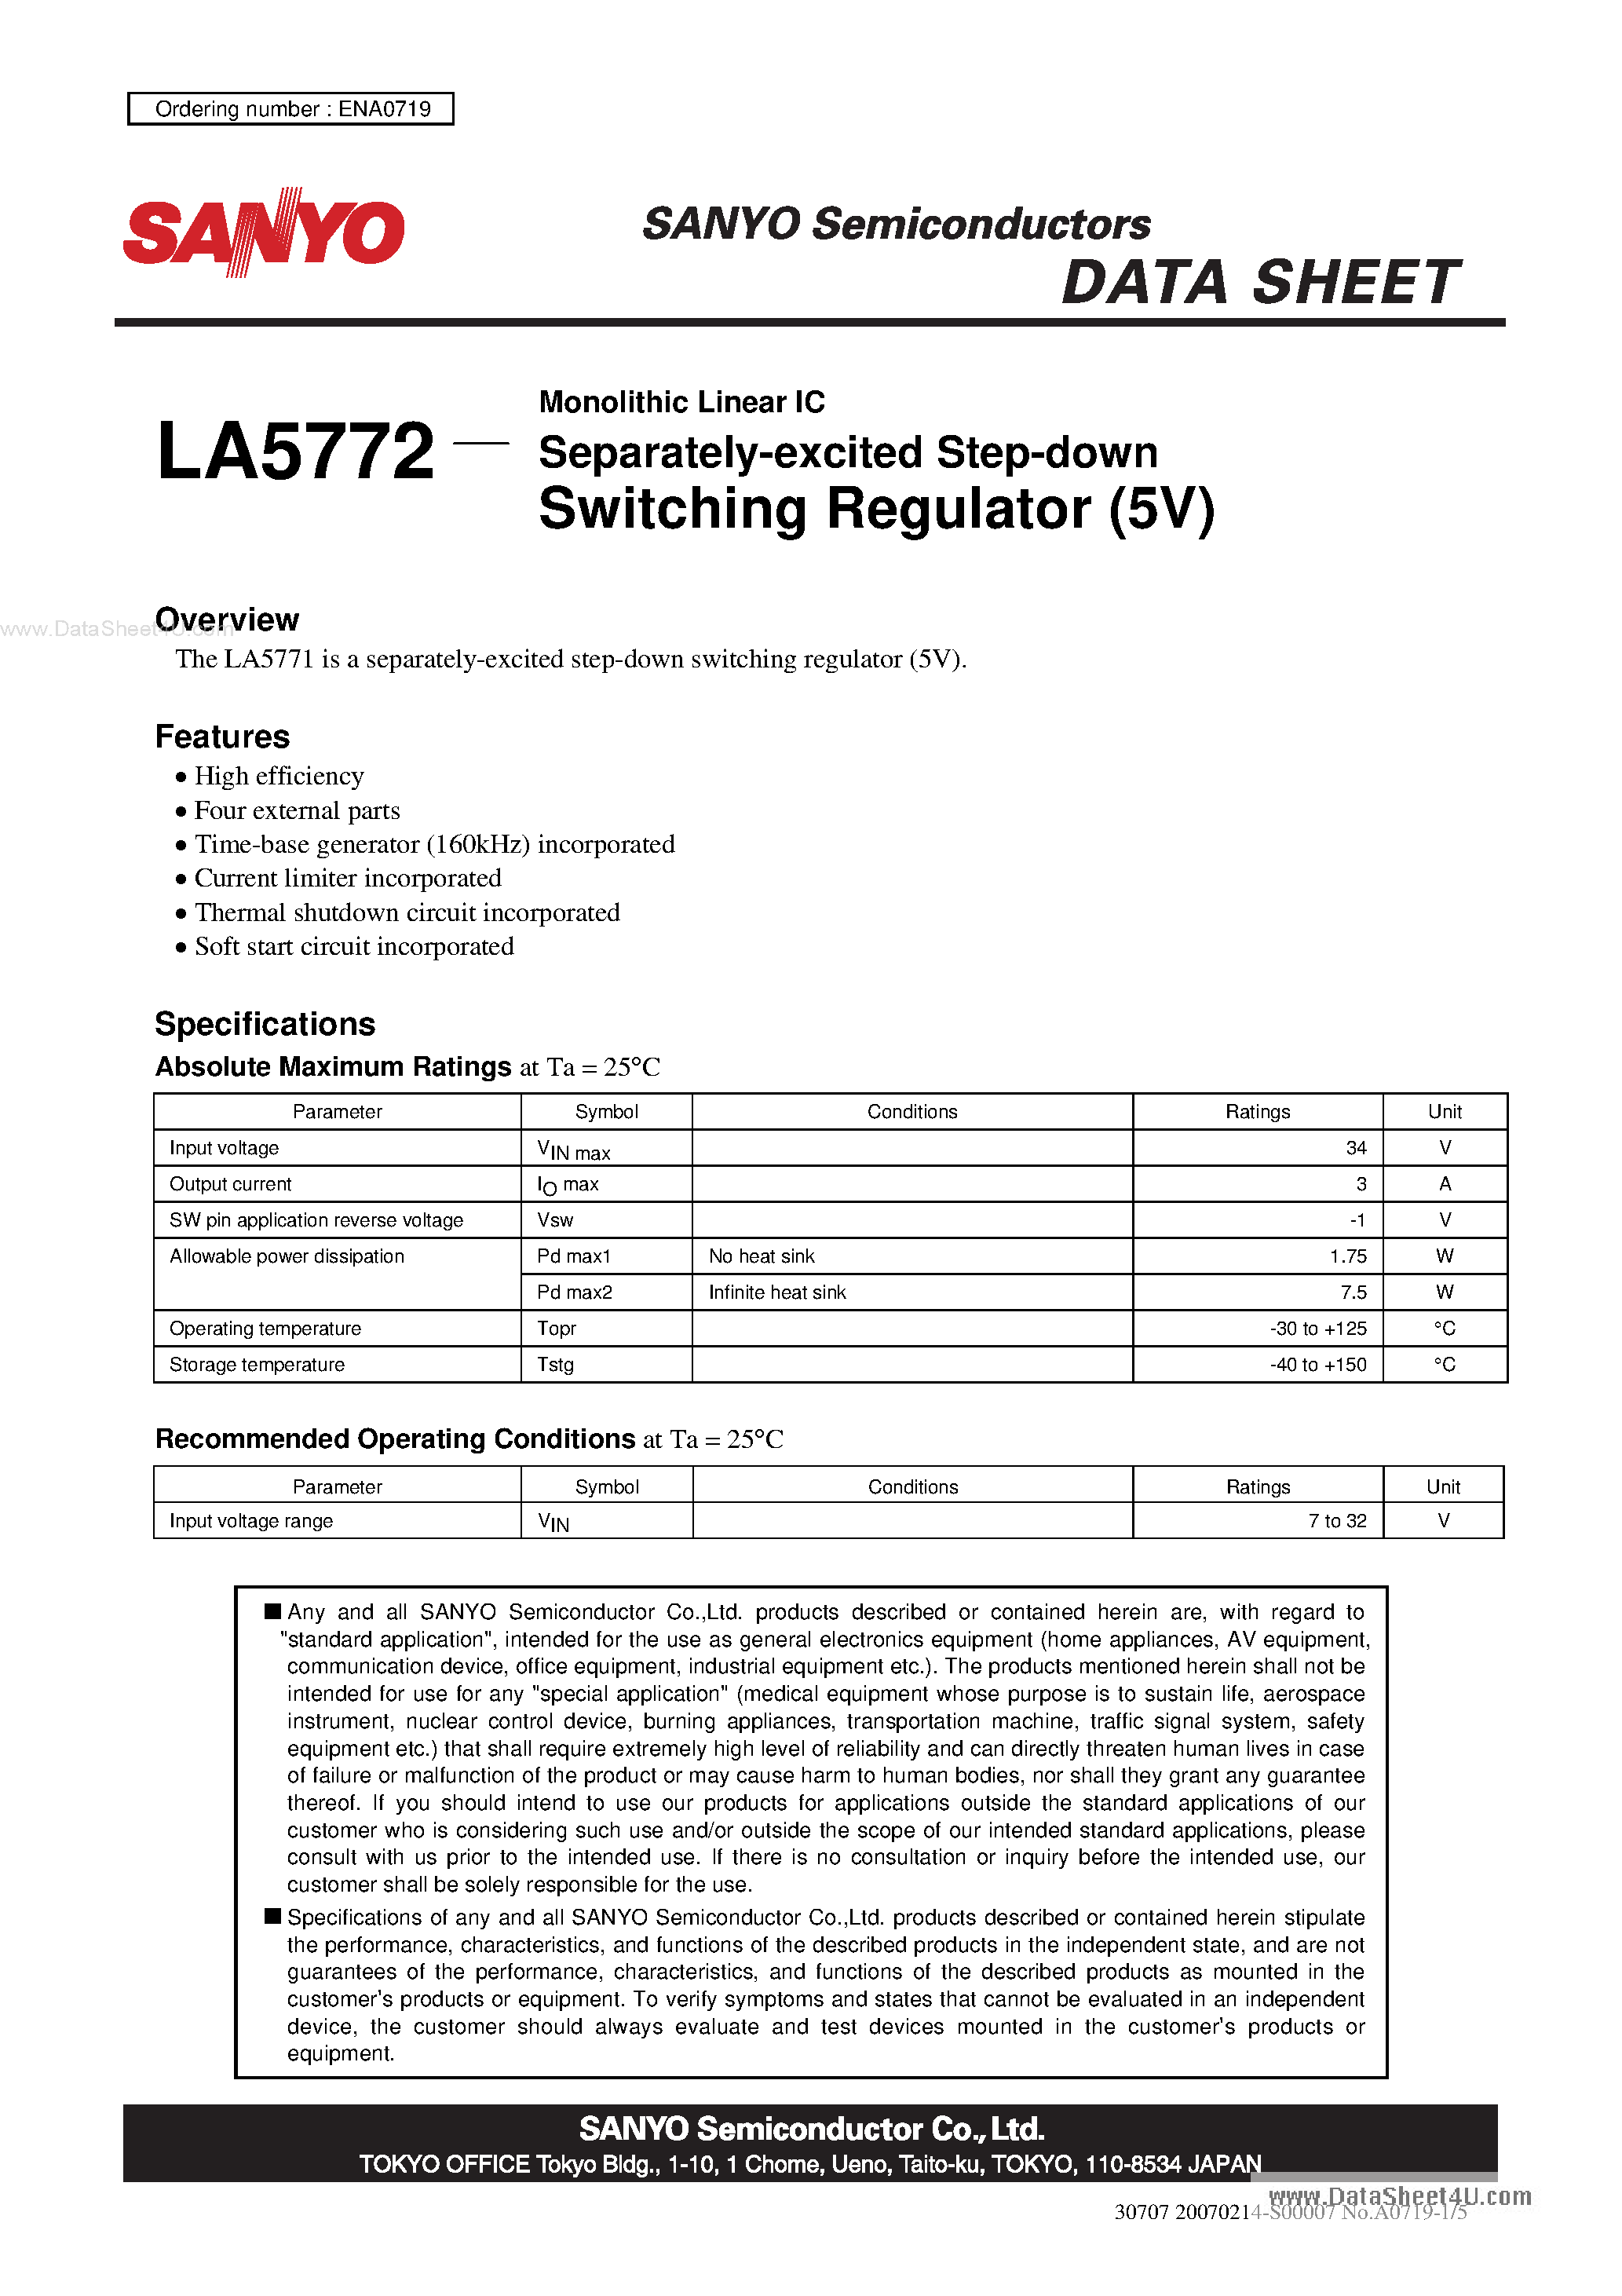 Даташит LA5772 - Monolithic Linear IC Separately-Excited Step-Down Switching Regulator страница 1